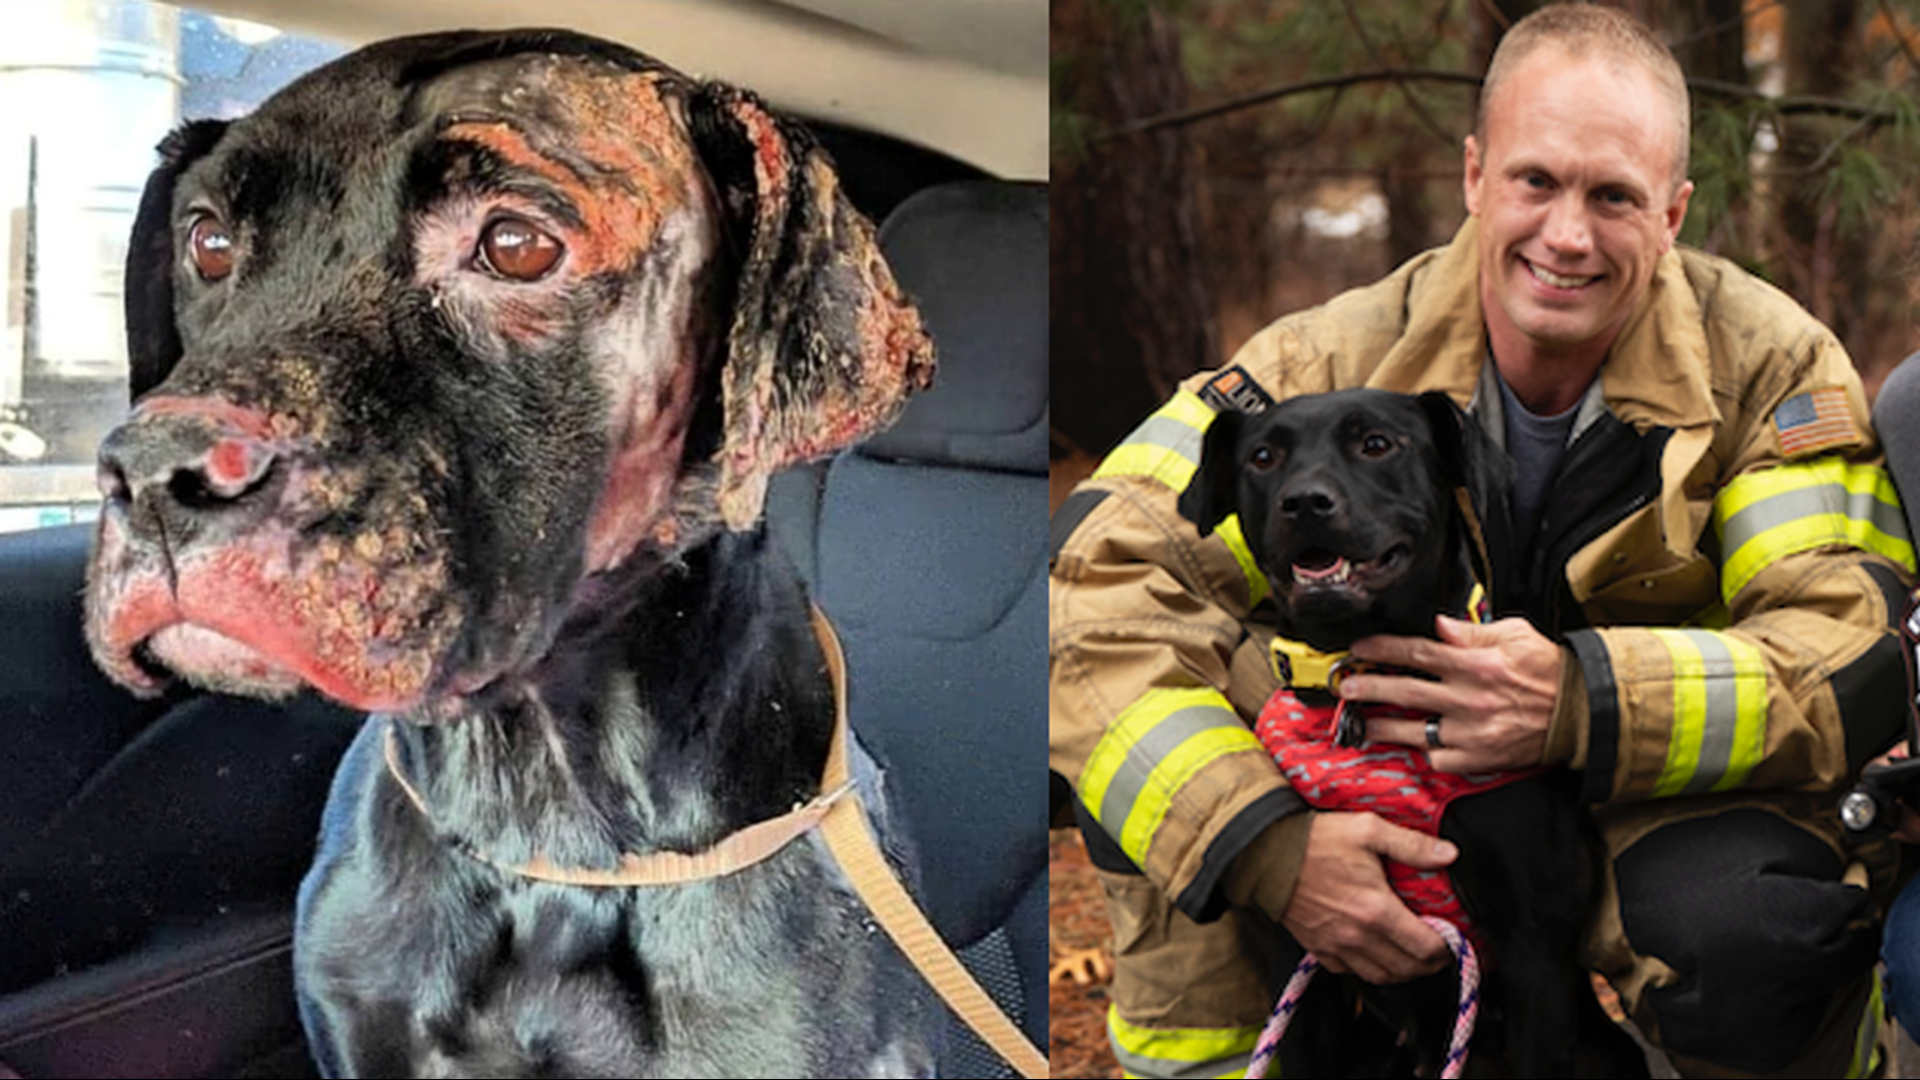 Lexi Ann was severely burned in a house fire. Now she's been adopted by a firefighter... who has a special mission for the brave dog.